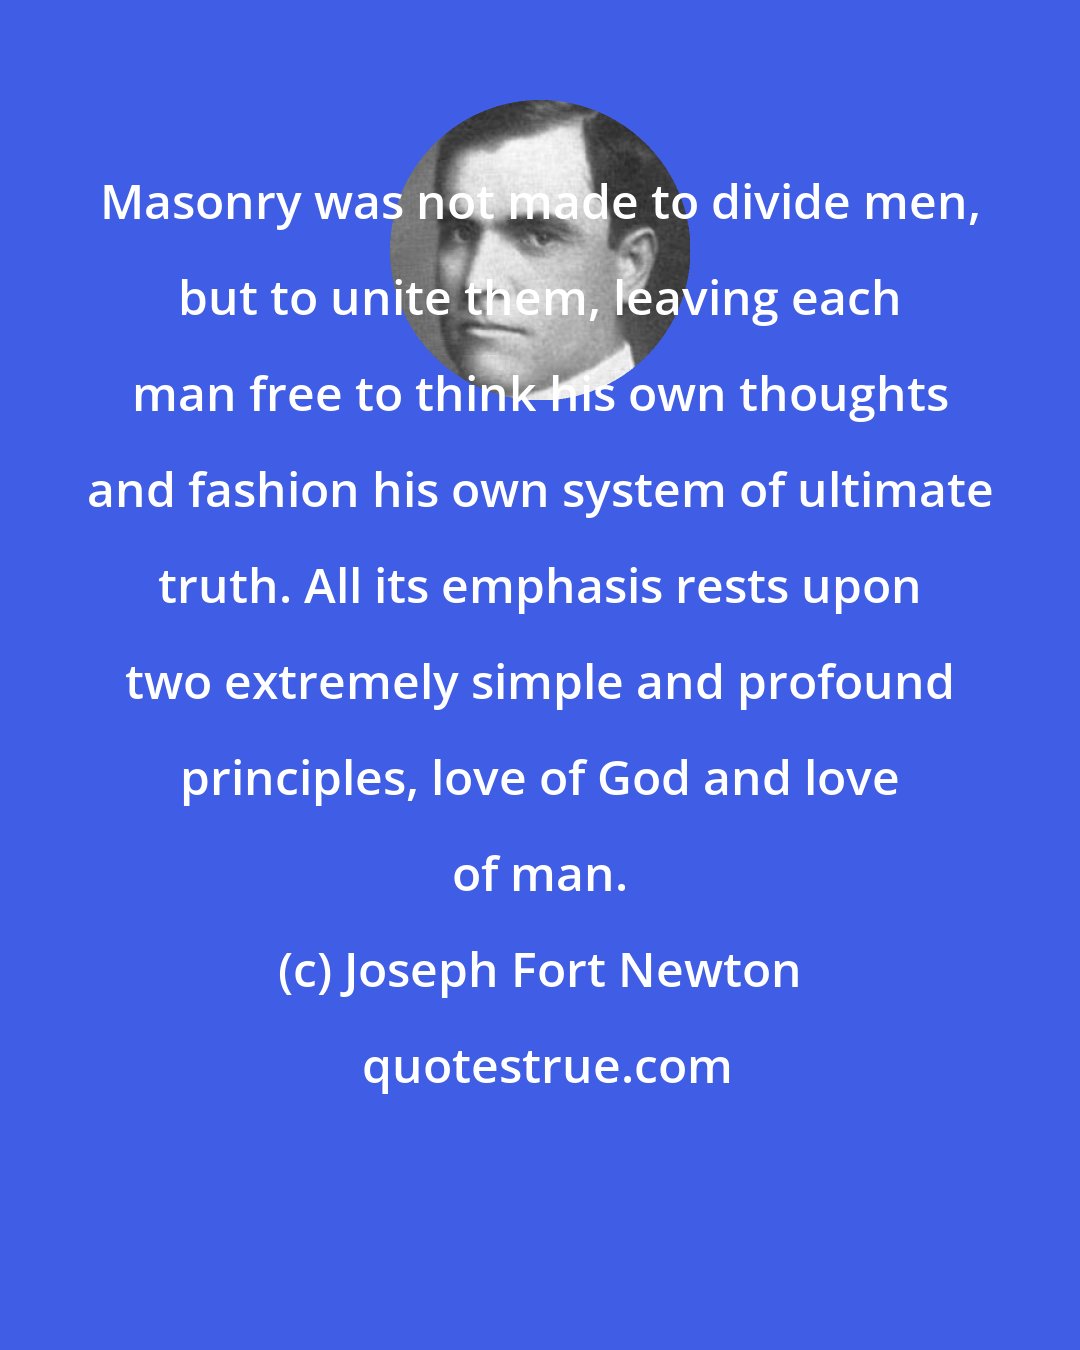 Joseph Fort Newton: Masonry was not made to divide men, but to unite them, leaving each man free to think his own thoughts and fashion his own system of ultimate truth. All its emphasis rests upon two extremely simple and profound principles, love of God and love of man.